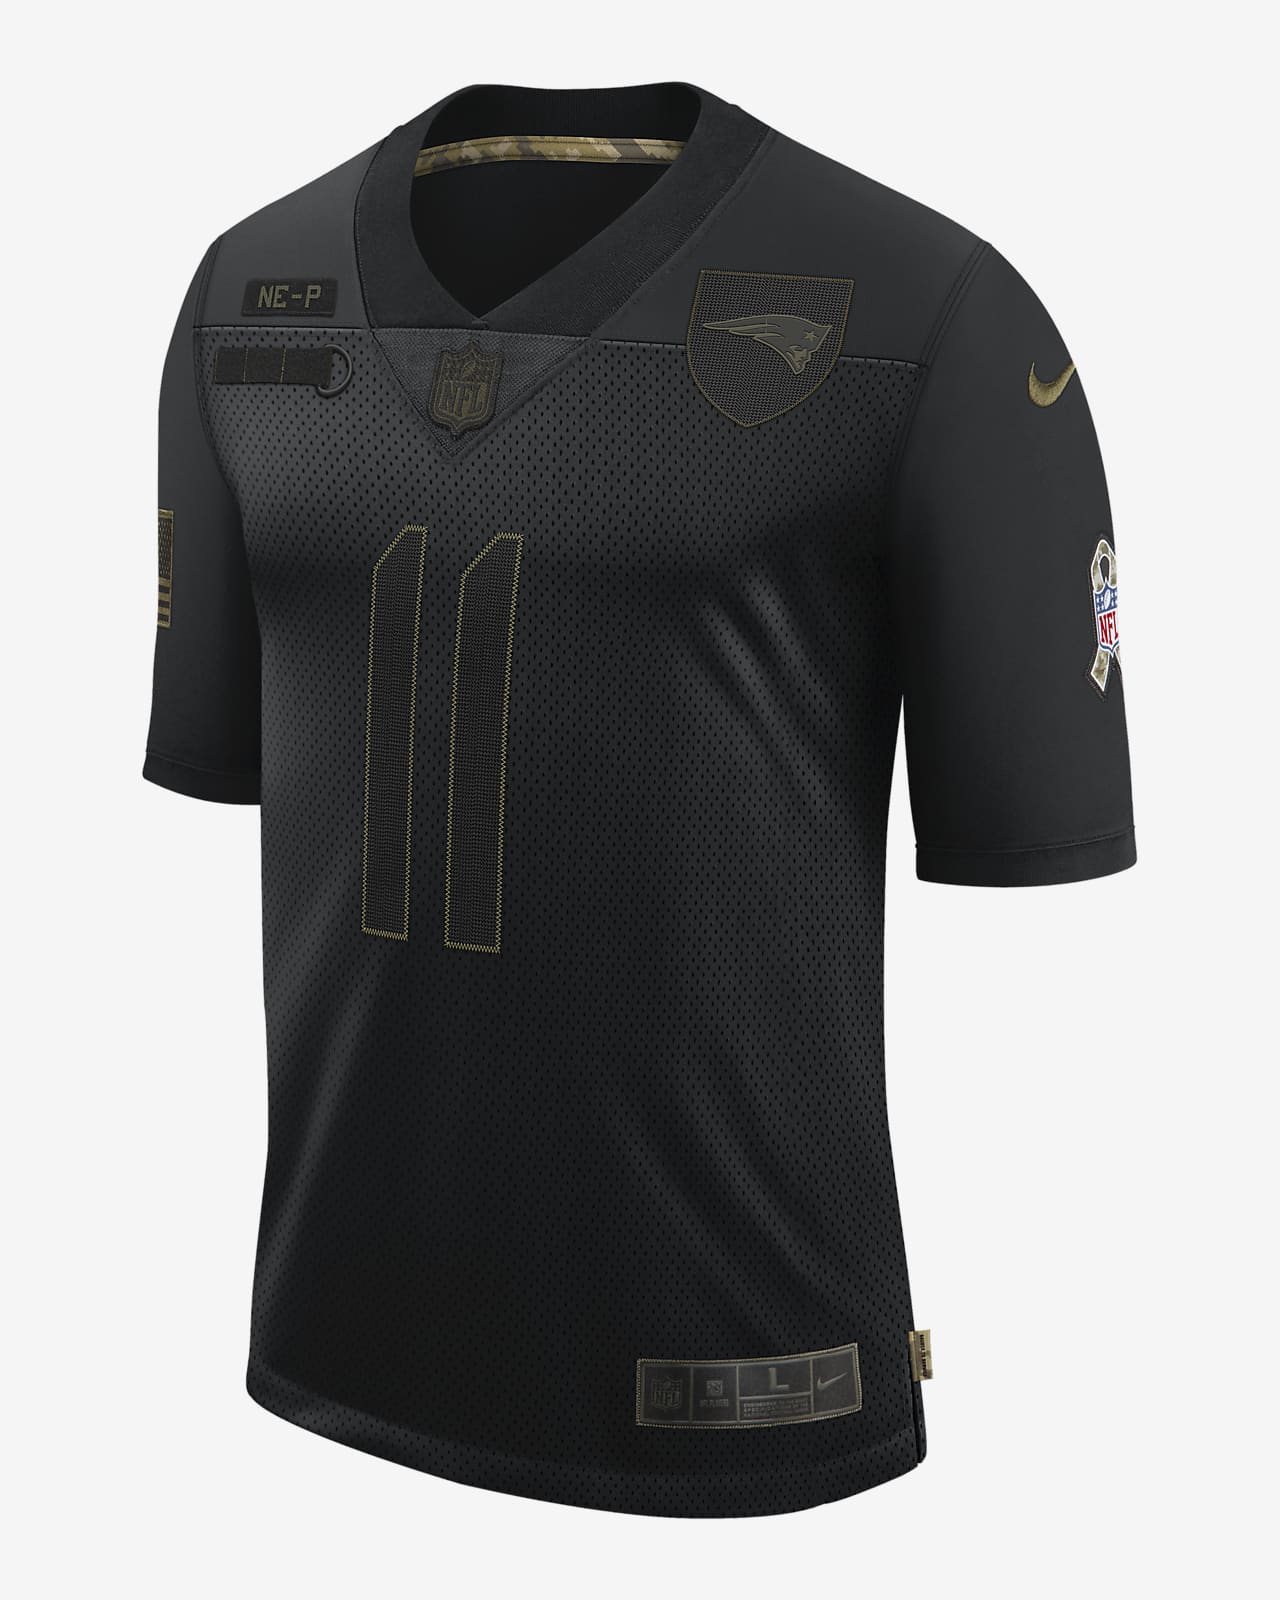 salute to service patriots jersey